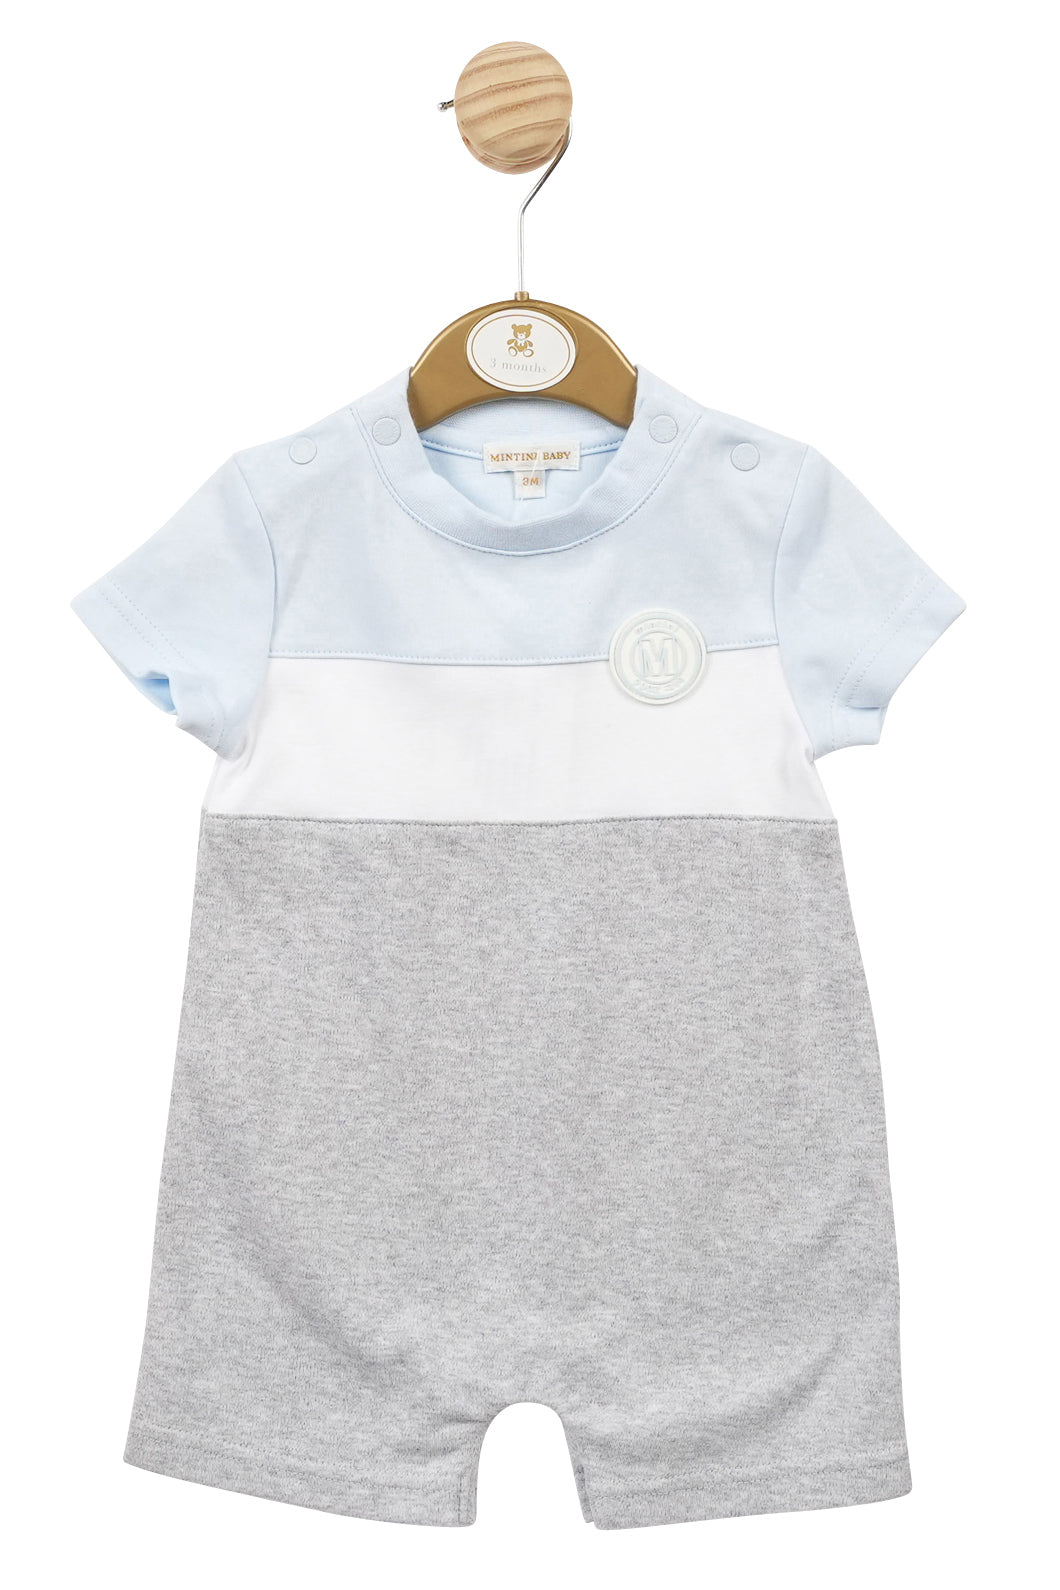 Mintini Baby "Silas" Baby Blue & Grey Romper | Millie and John